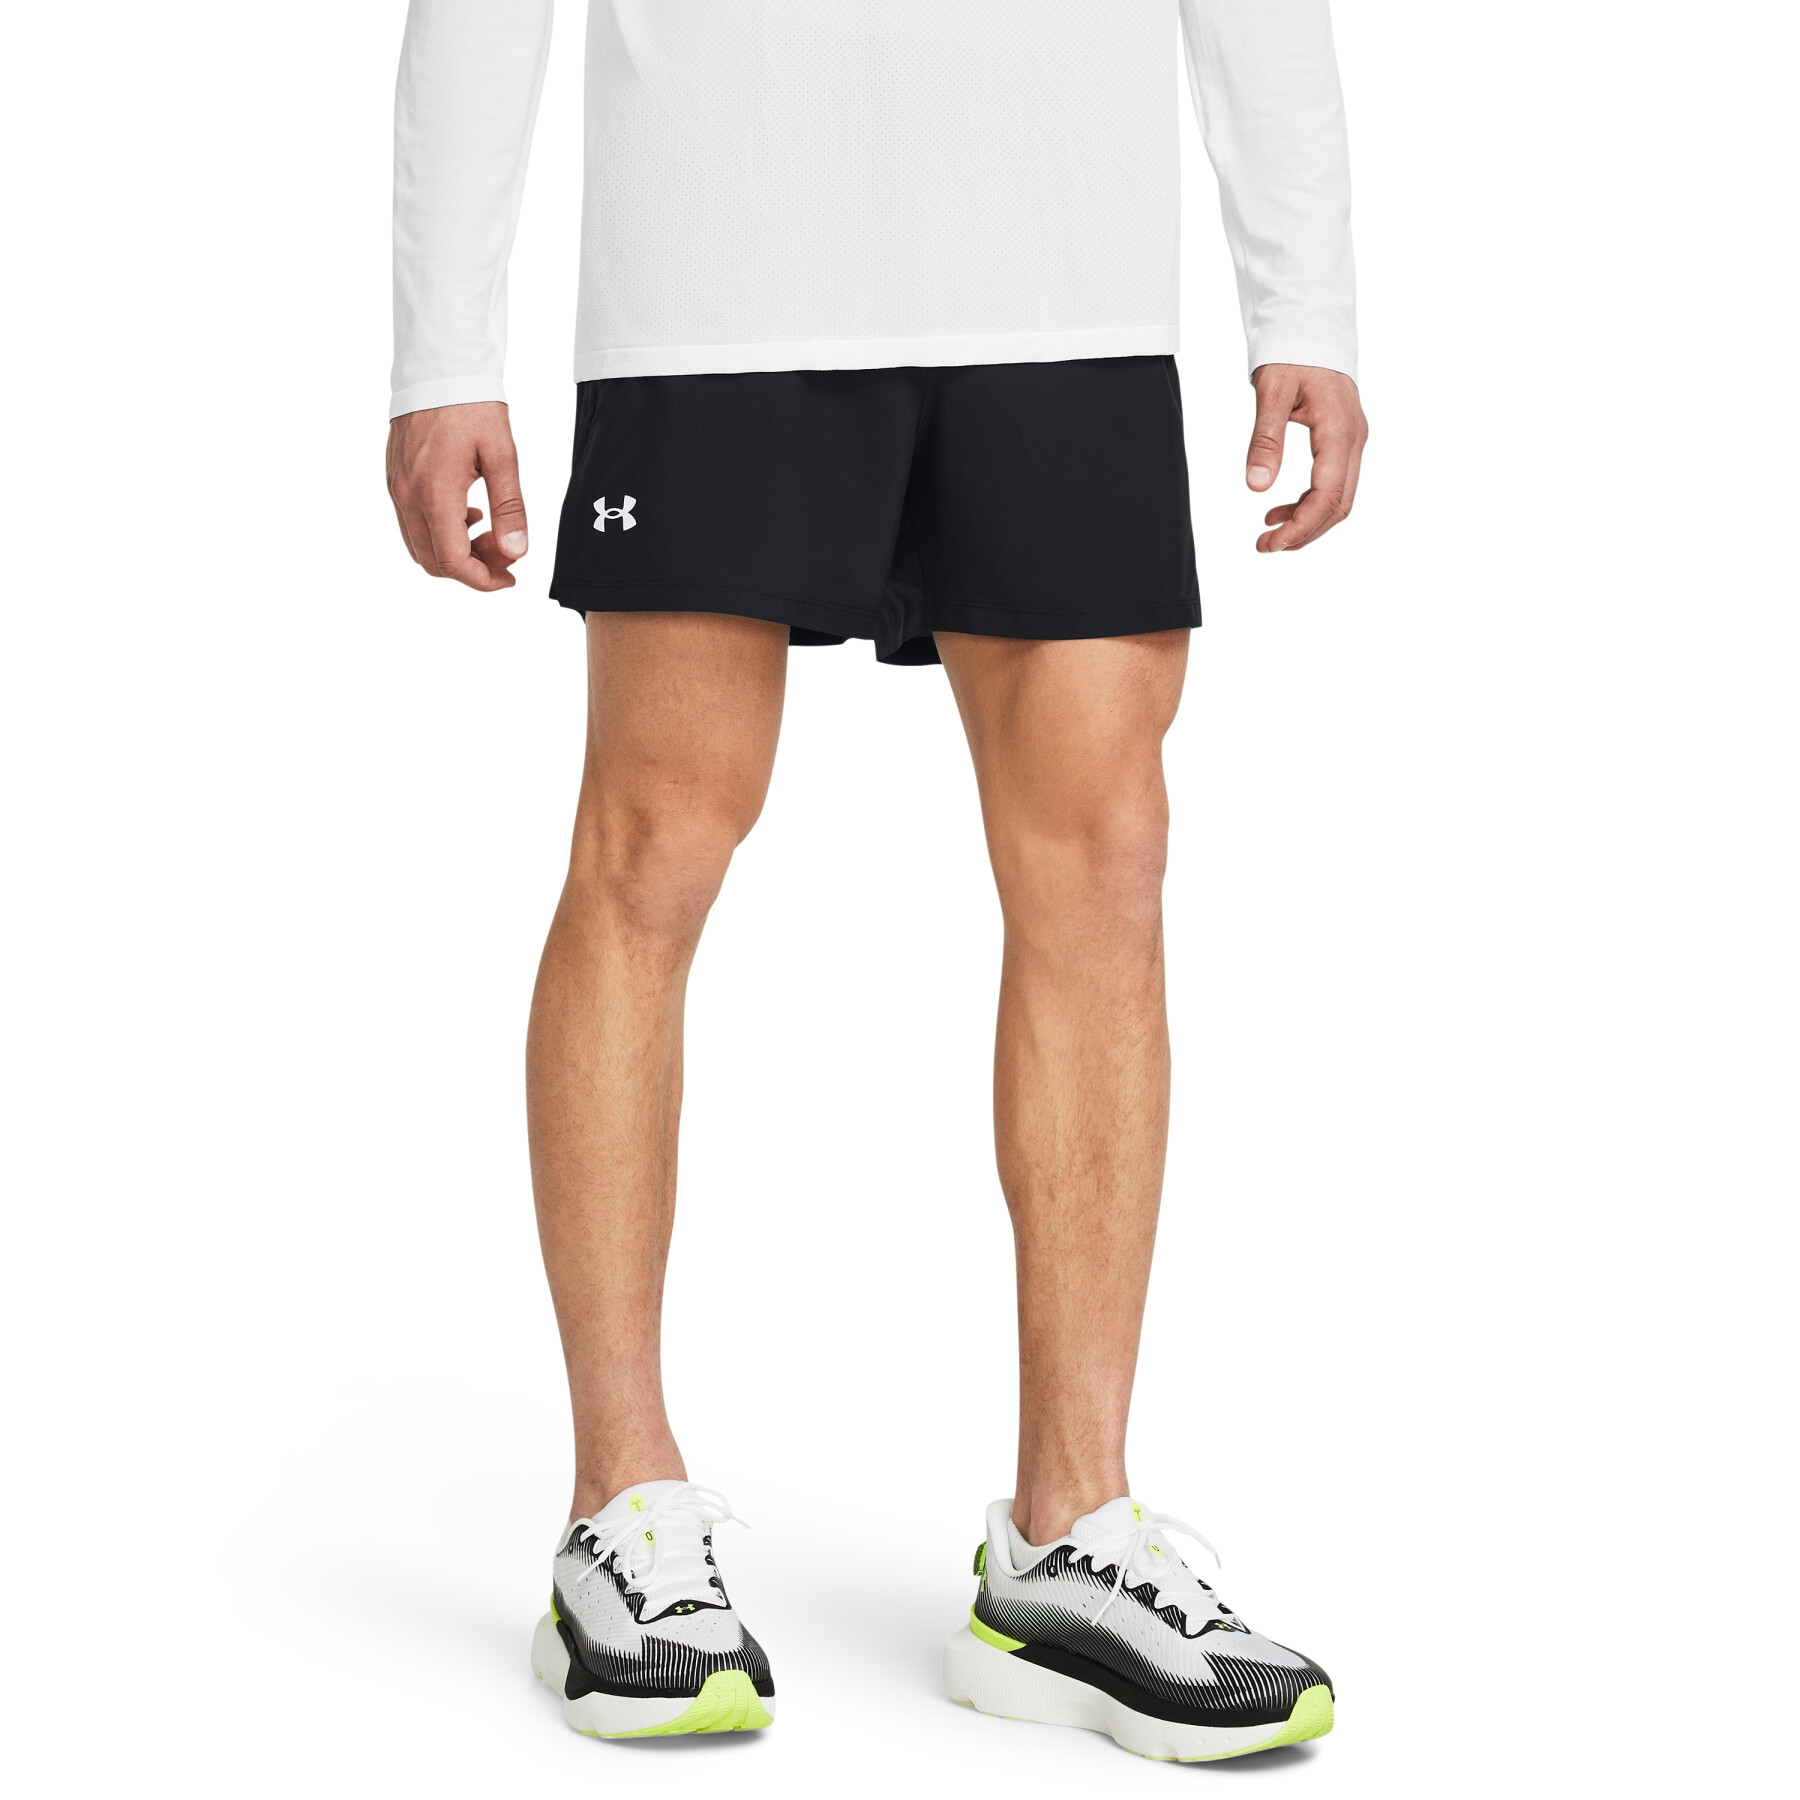 Shorts Under Armour Launch 5"